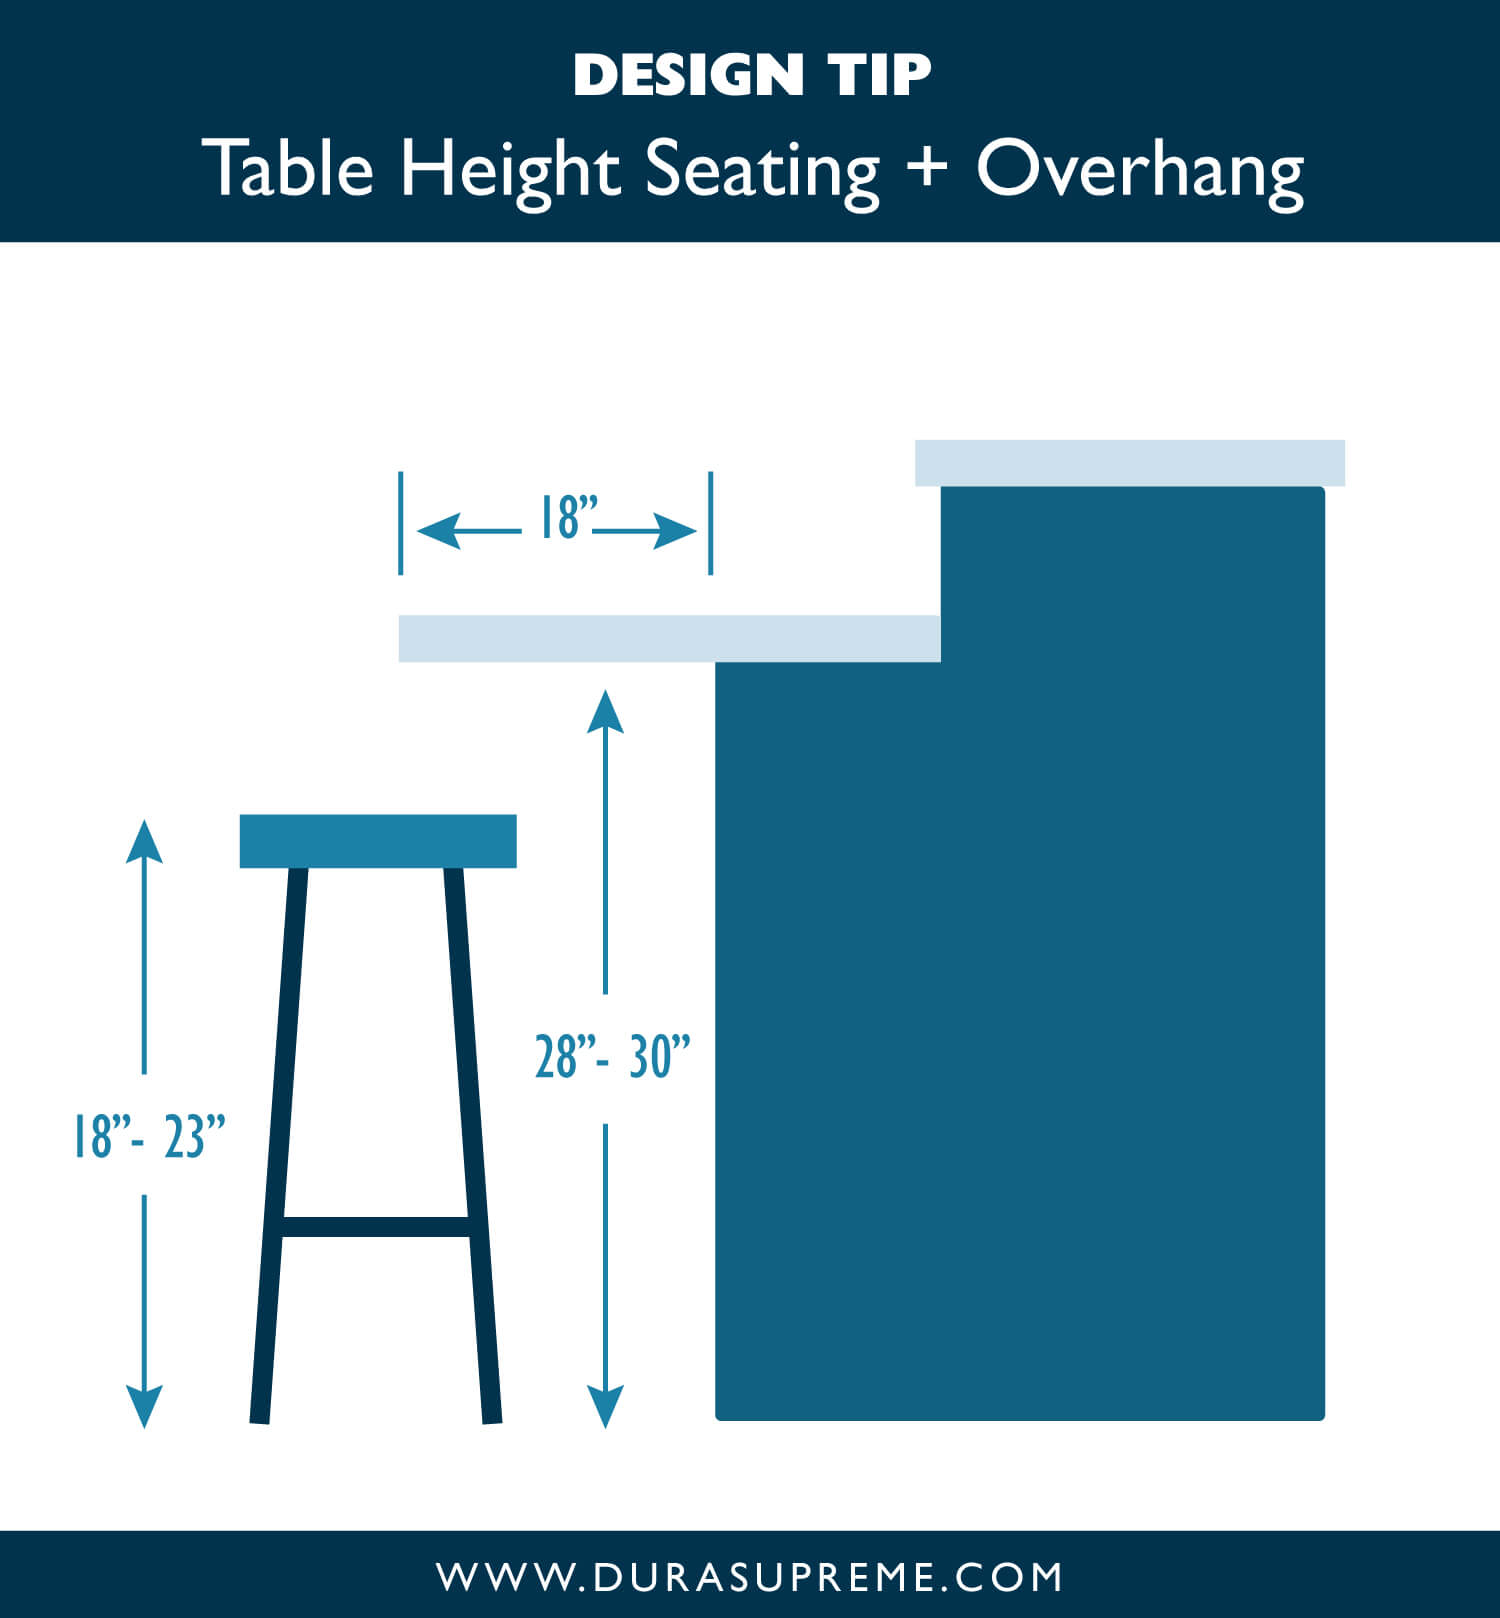 Kitchen Design 101 Countertop Heights, How Much Space Do You Need For Bar Stools